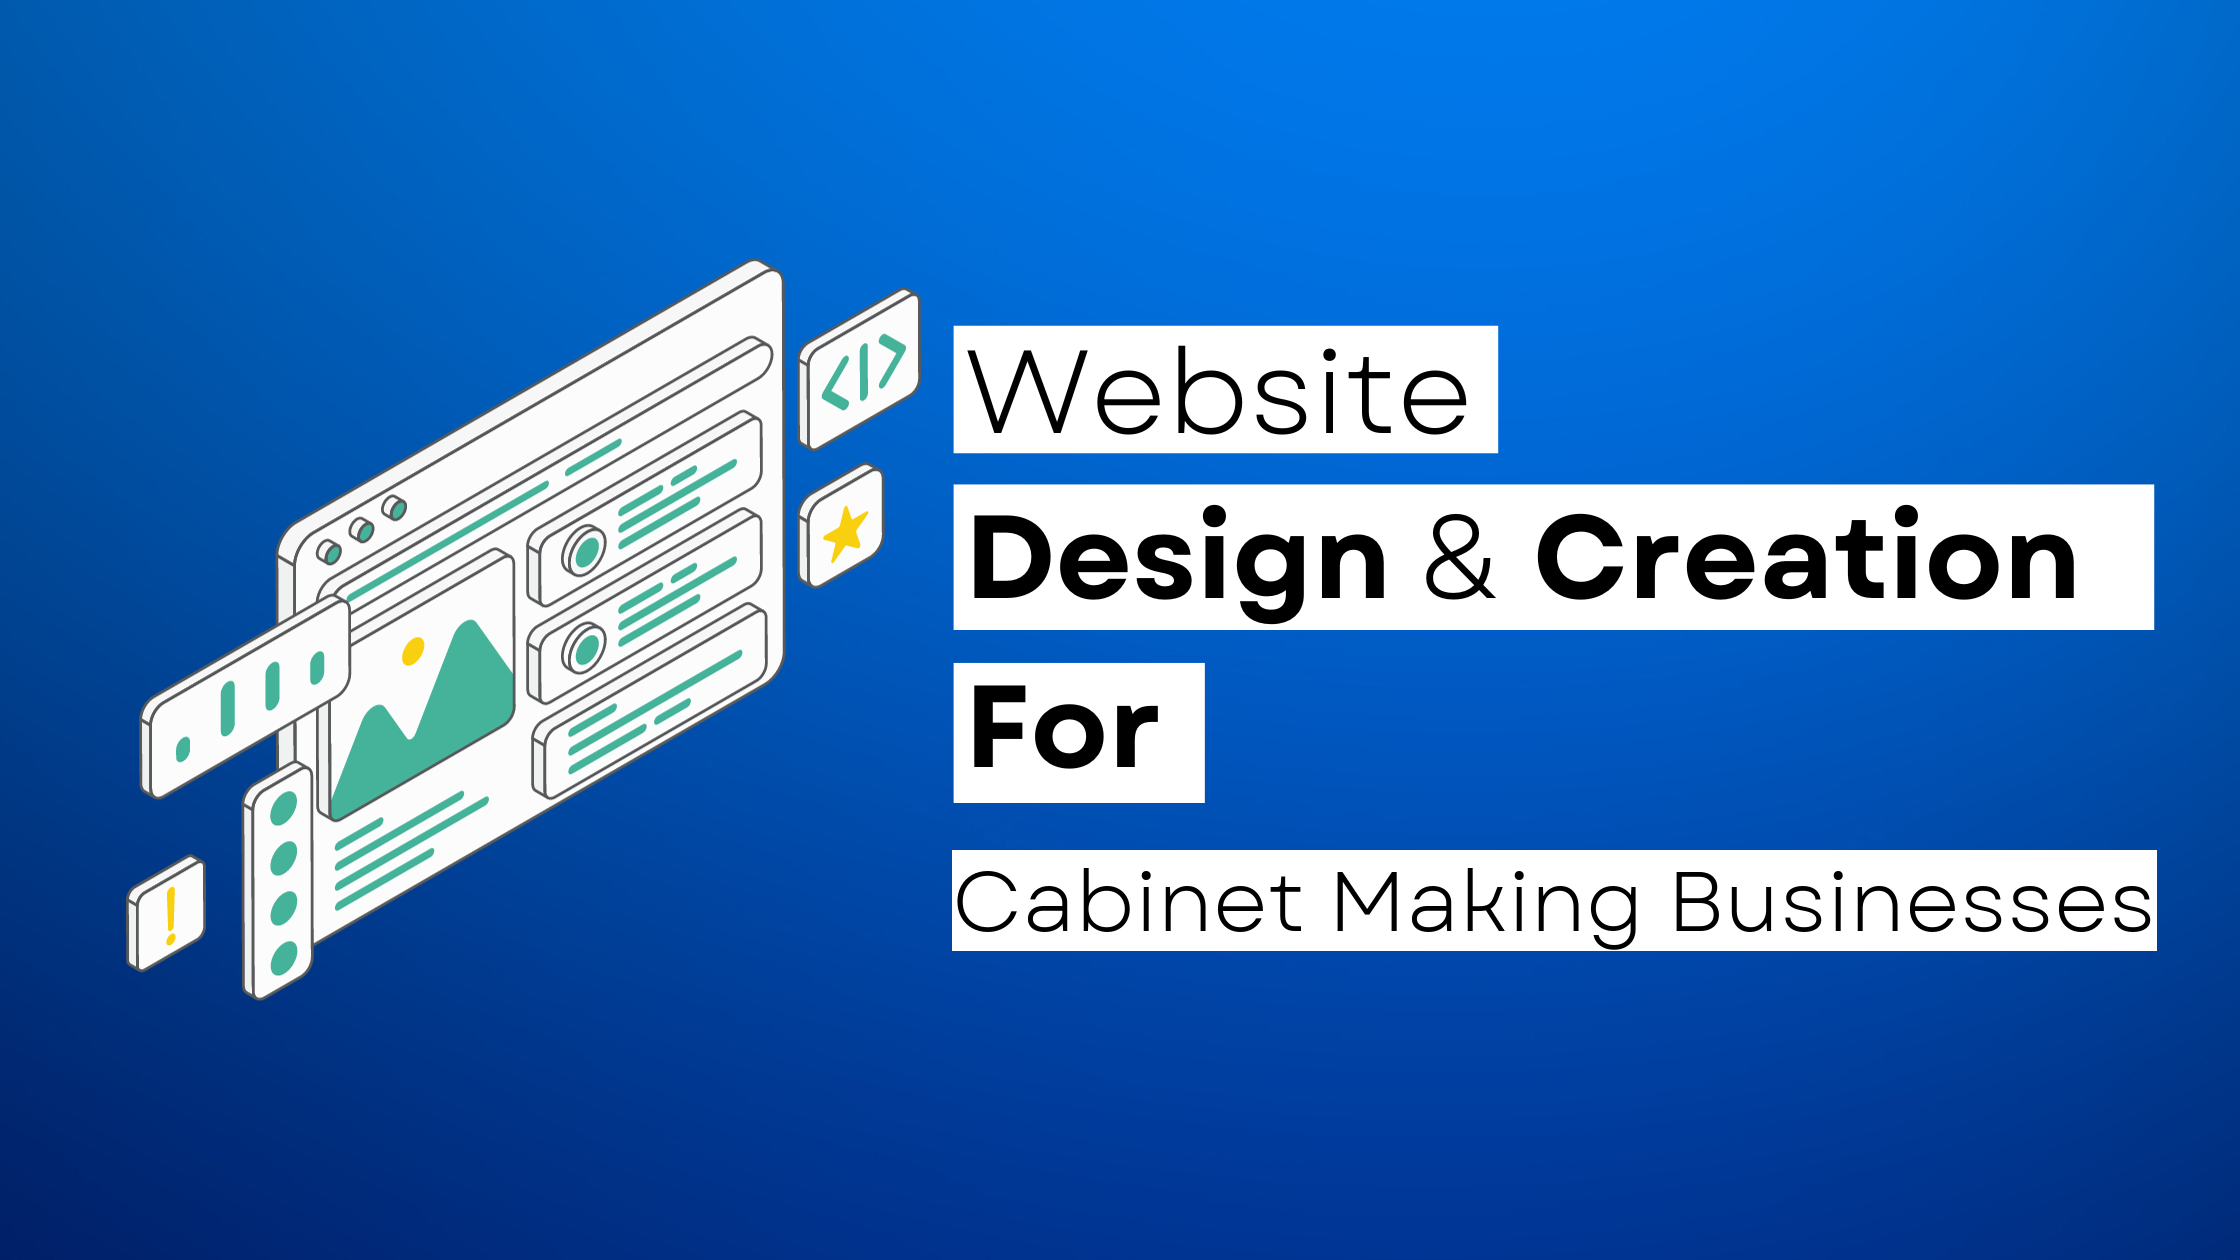 How to start a Cabinet Making website